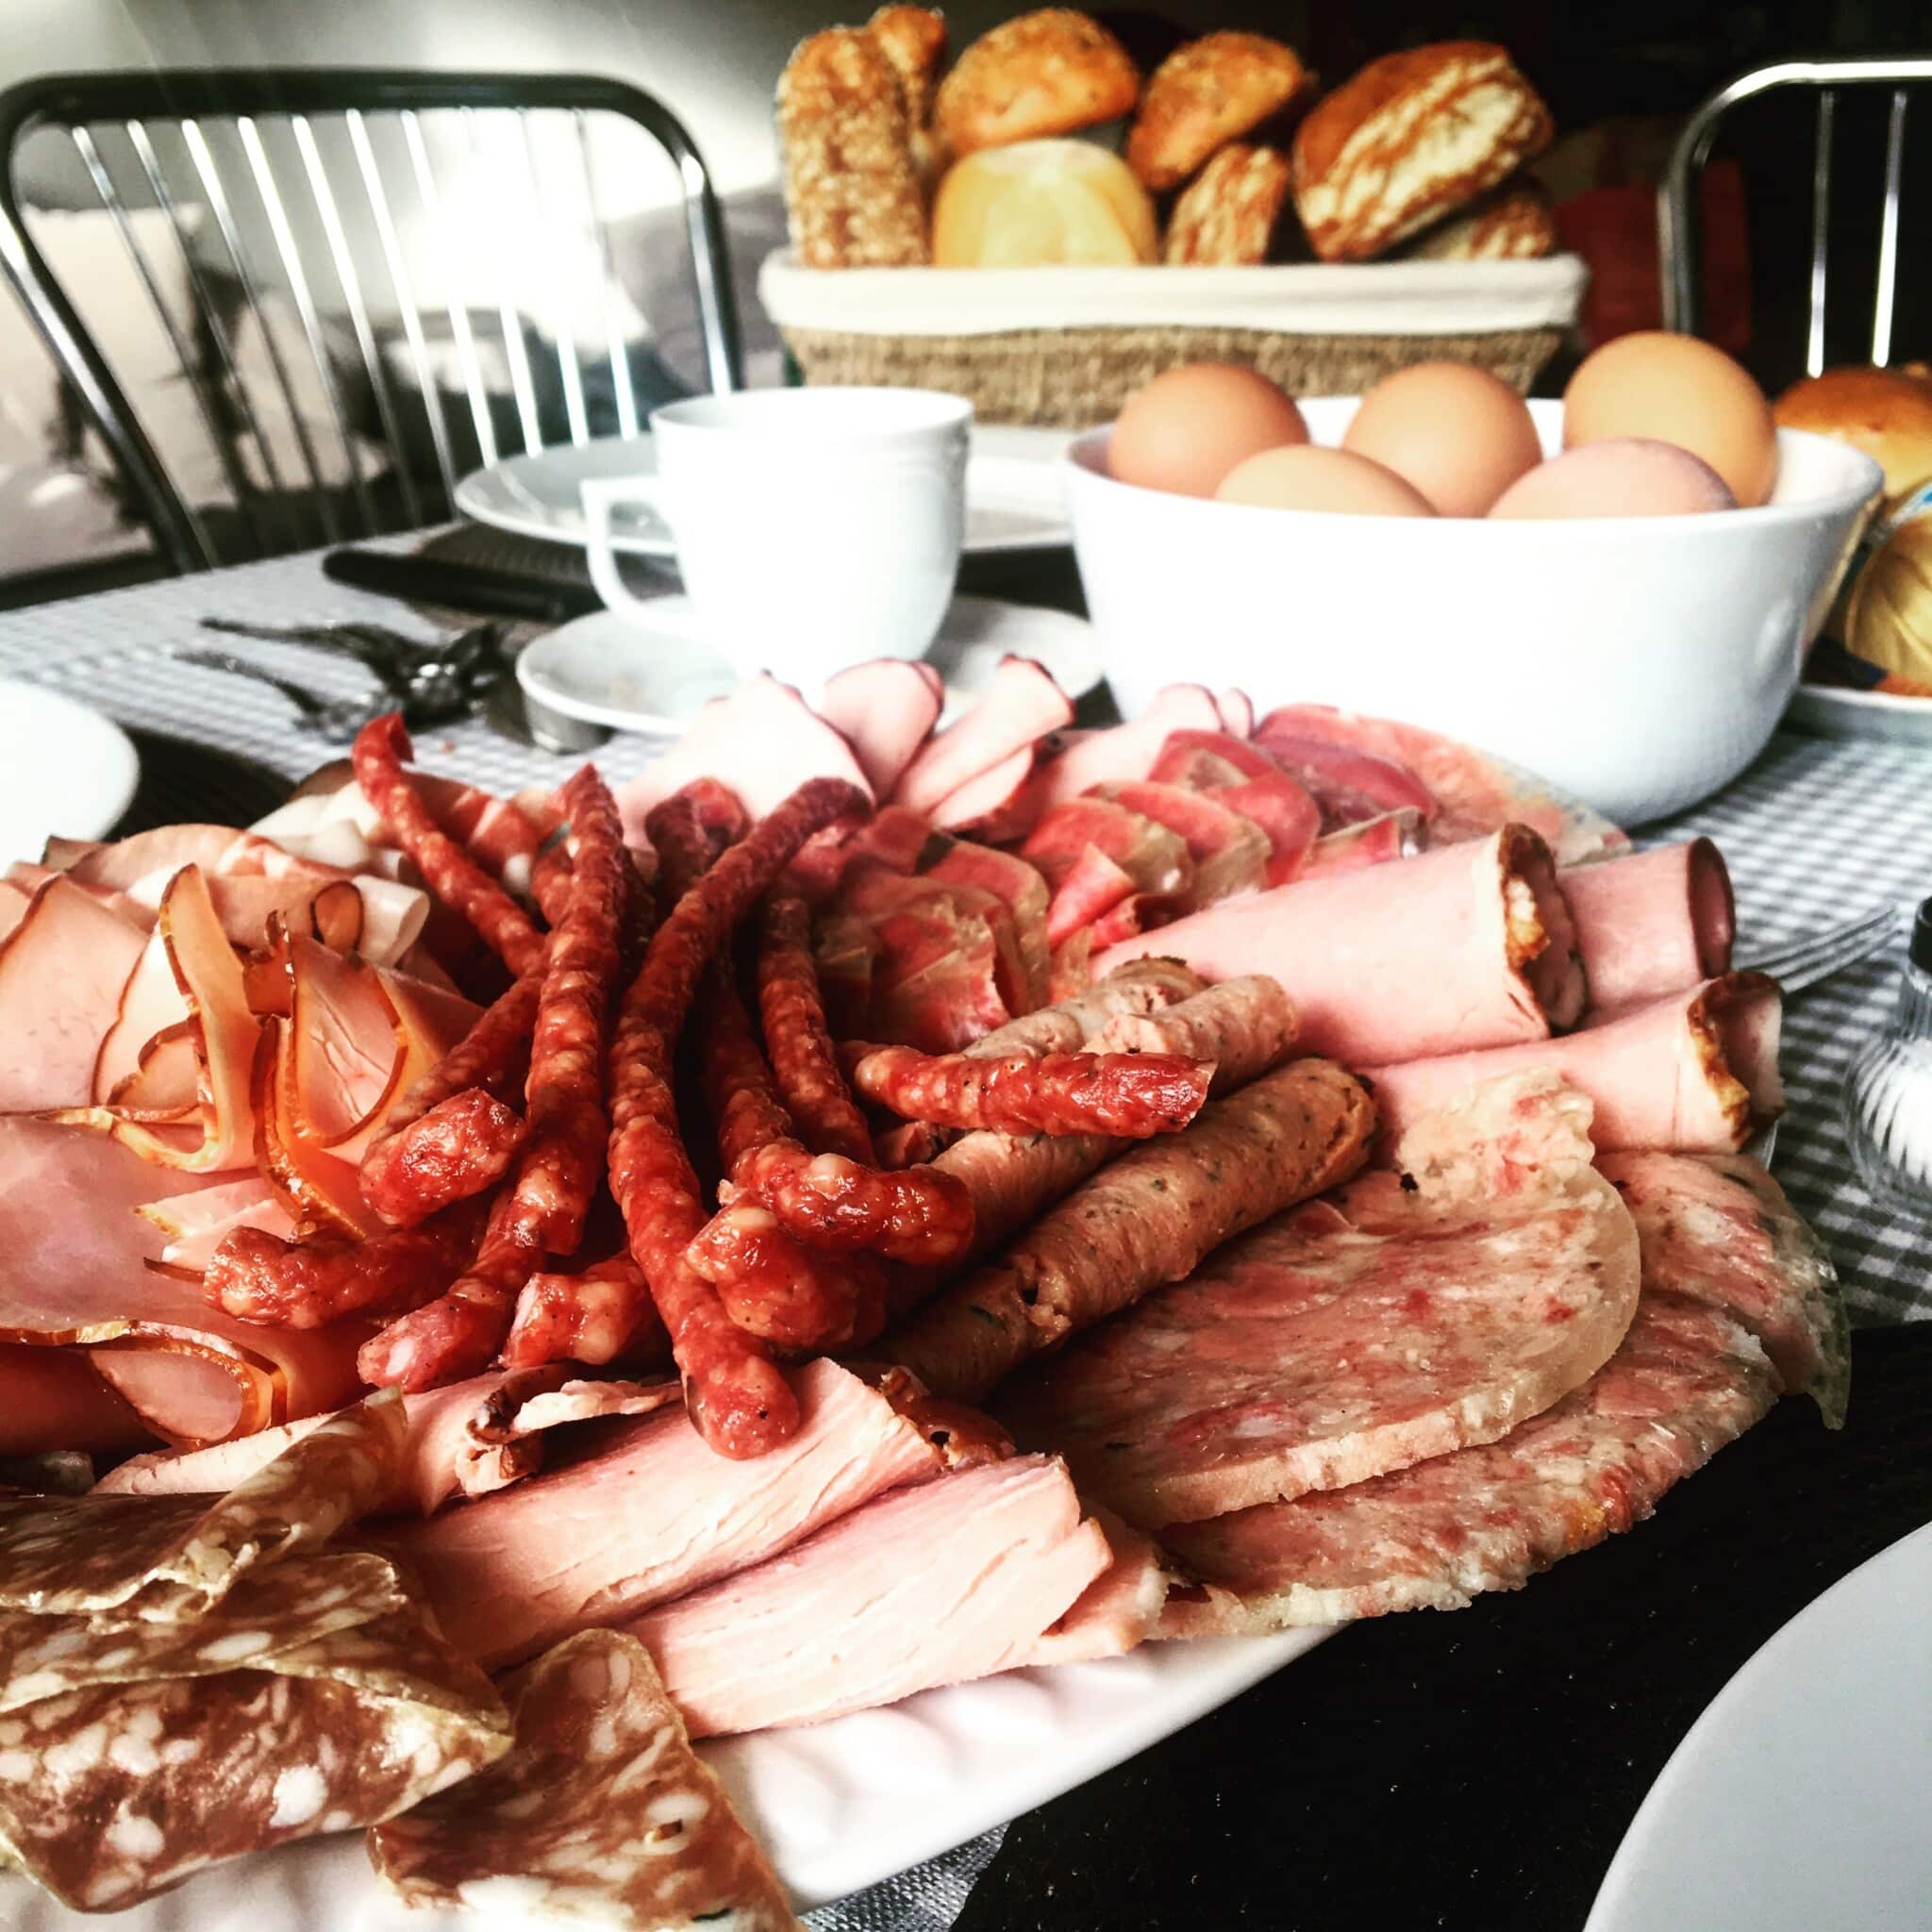 Various meats on a platter with whole eggs and a bread basket on a table.